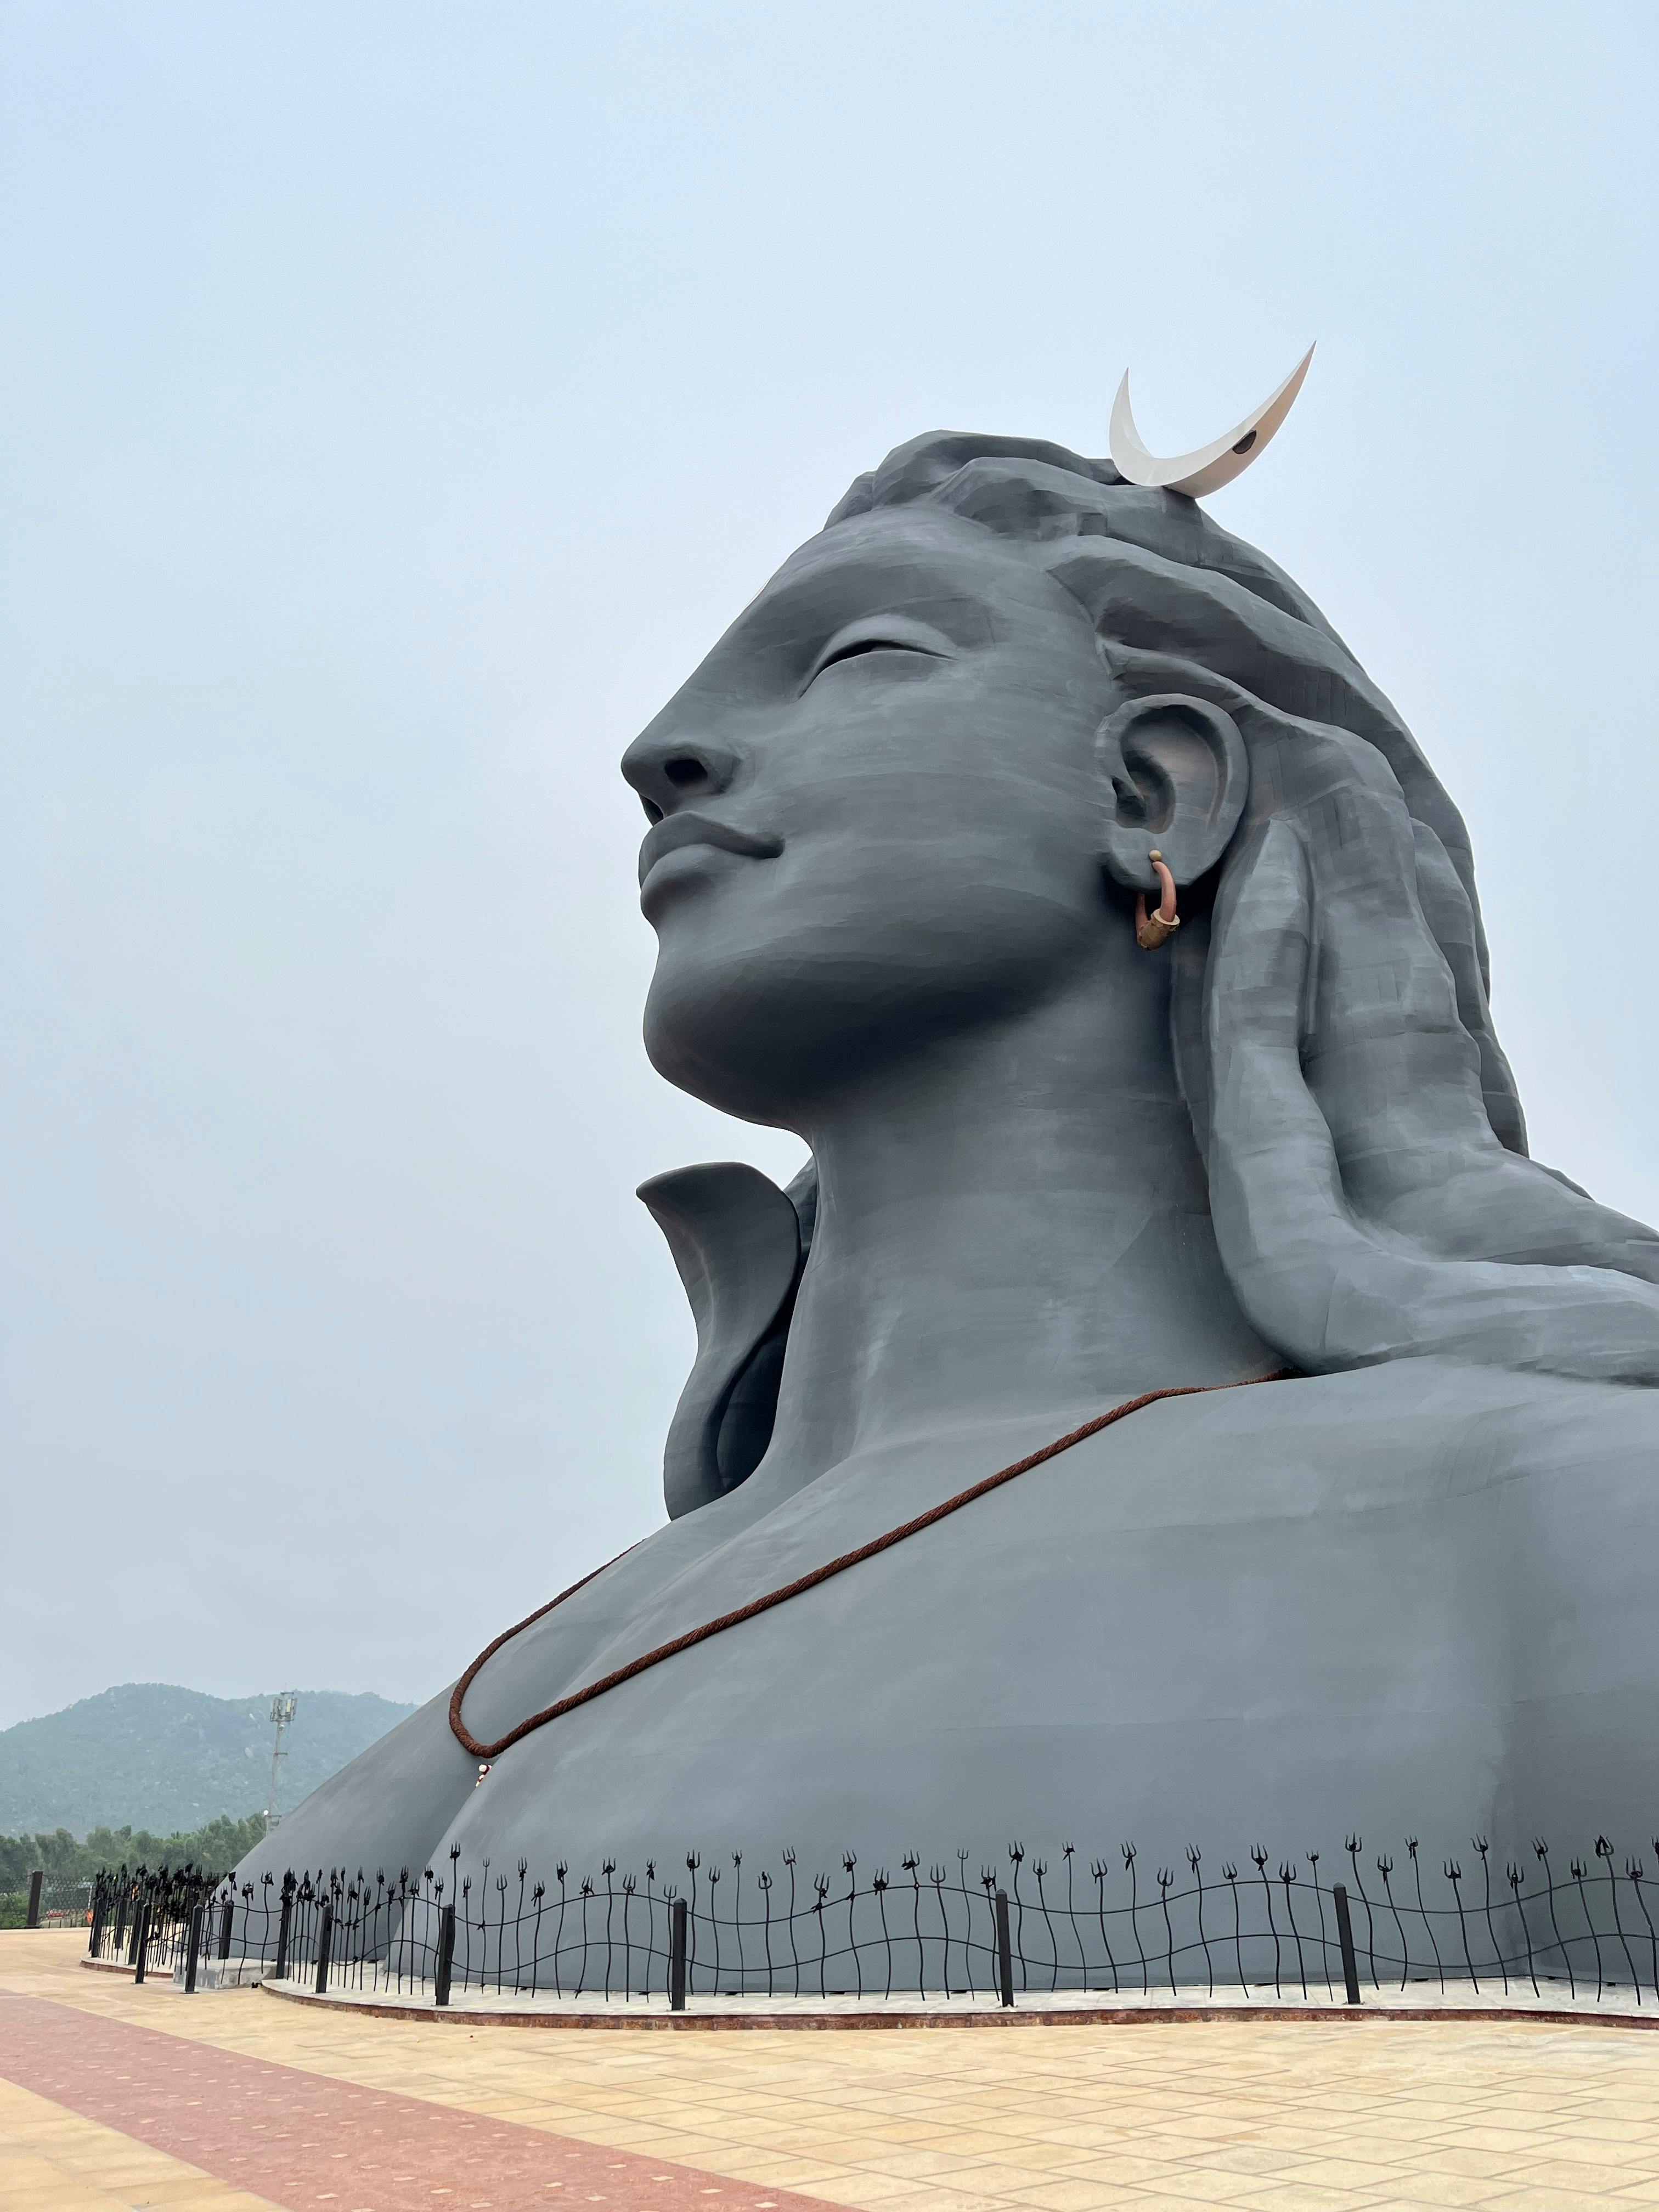 Aadiyogi HD Wallpaper - Free Download for Mobile and Desktop in 2023 |  Cartoon character pictures, Lord shiva pics, Beautiful scenery nature